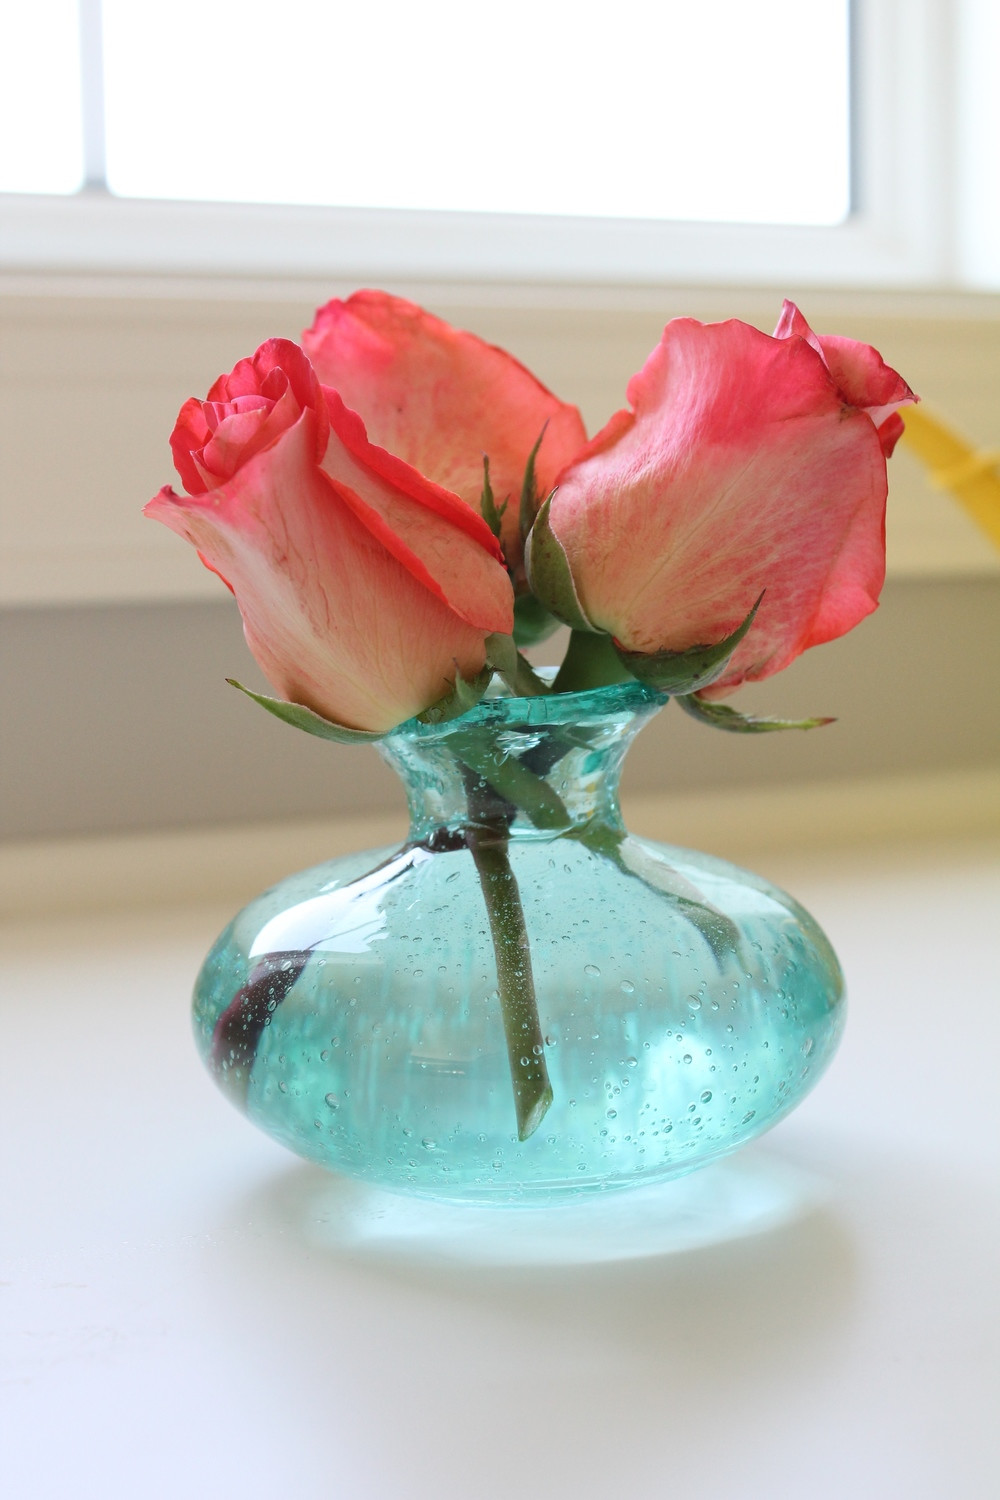 27 Amazing Lenox Small Bud Vase 2024 free download lenox small bud vase of blooming bud vase i love these for all of the single flowers and intended for i like to sprinkle them throughout my home placing one or two blooms in each vase that w